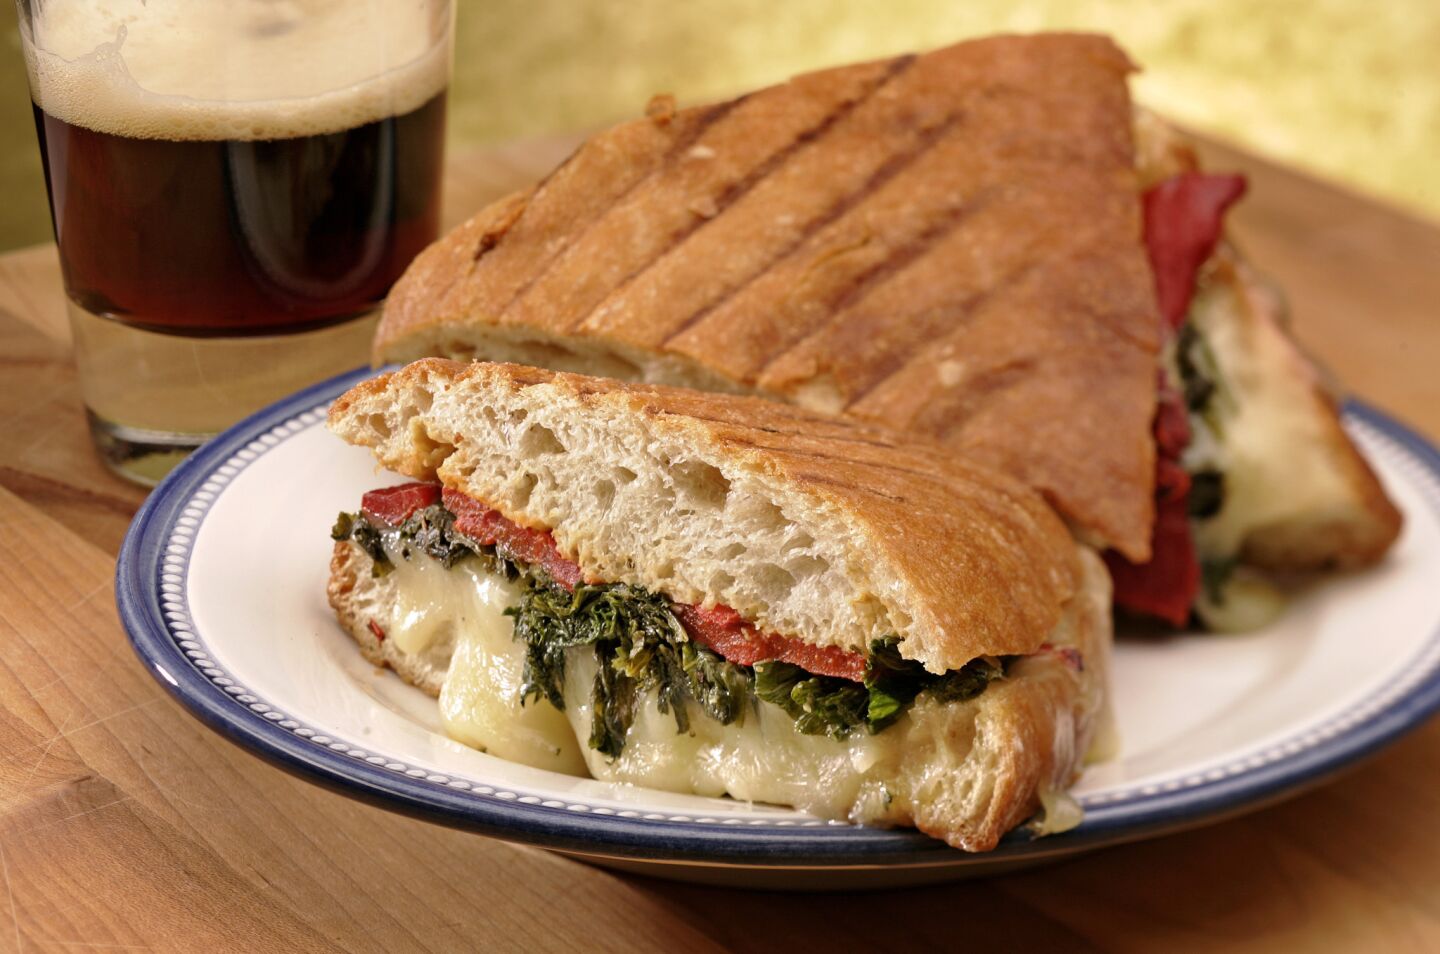 Ciabatta bread is piled with mustard greens, cheese and roasted red peppers. Recipe: Green panini with roasted peppers and Gruyere cheese